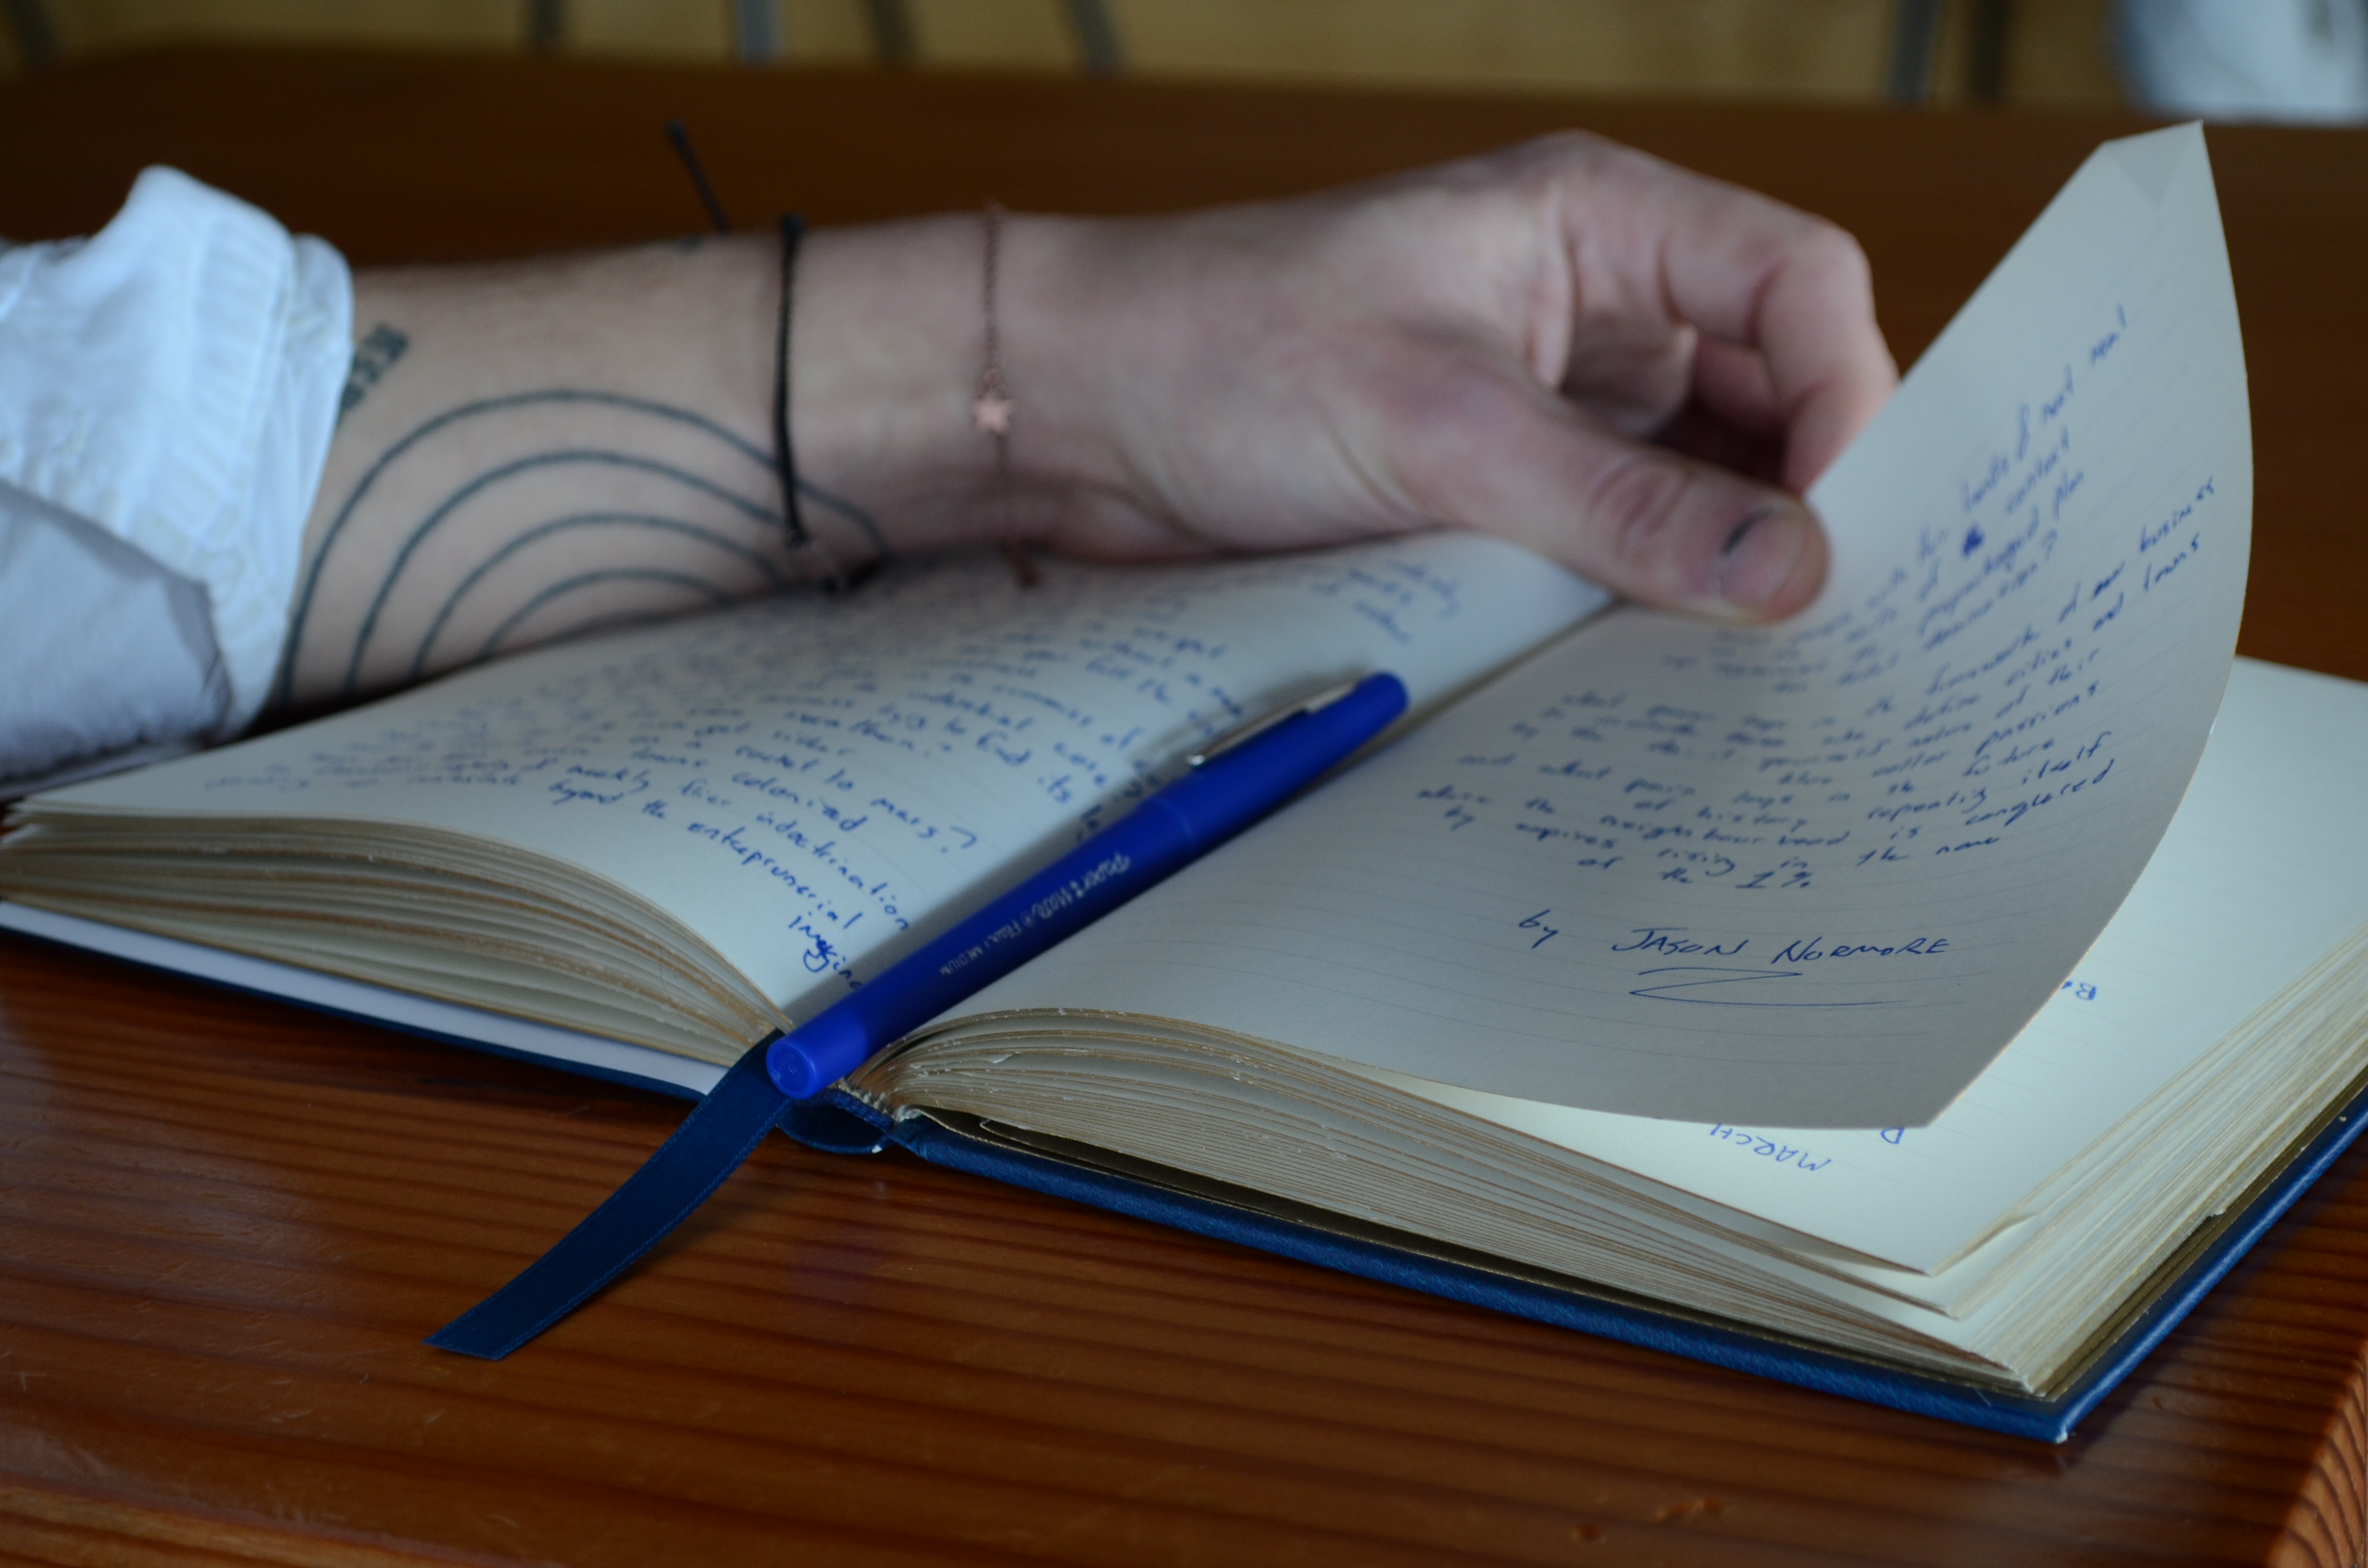 Jason Normore flips through his poetry notebook. The pages are marked in blue ink, and a blue pen lays in the centre of the book. Tattooed lines on his arm can be seen from this angle. 